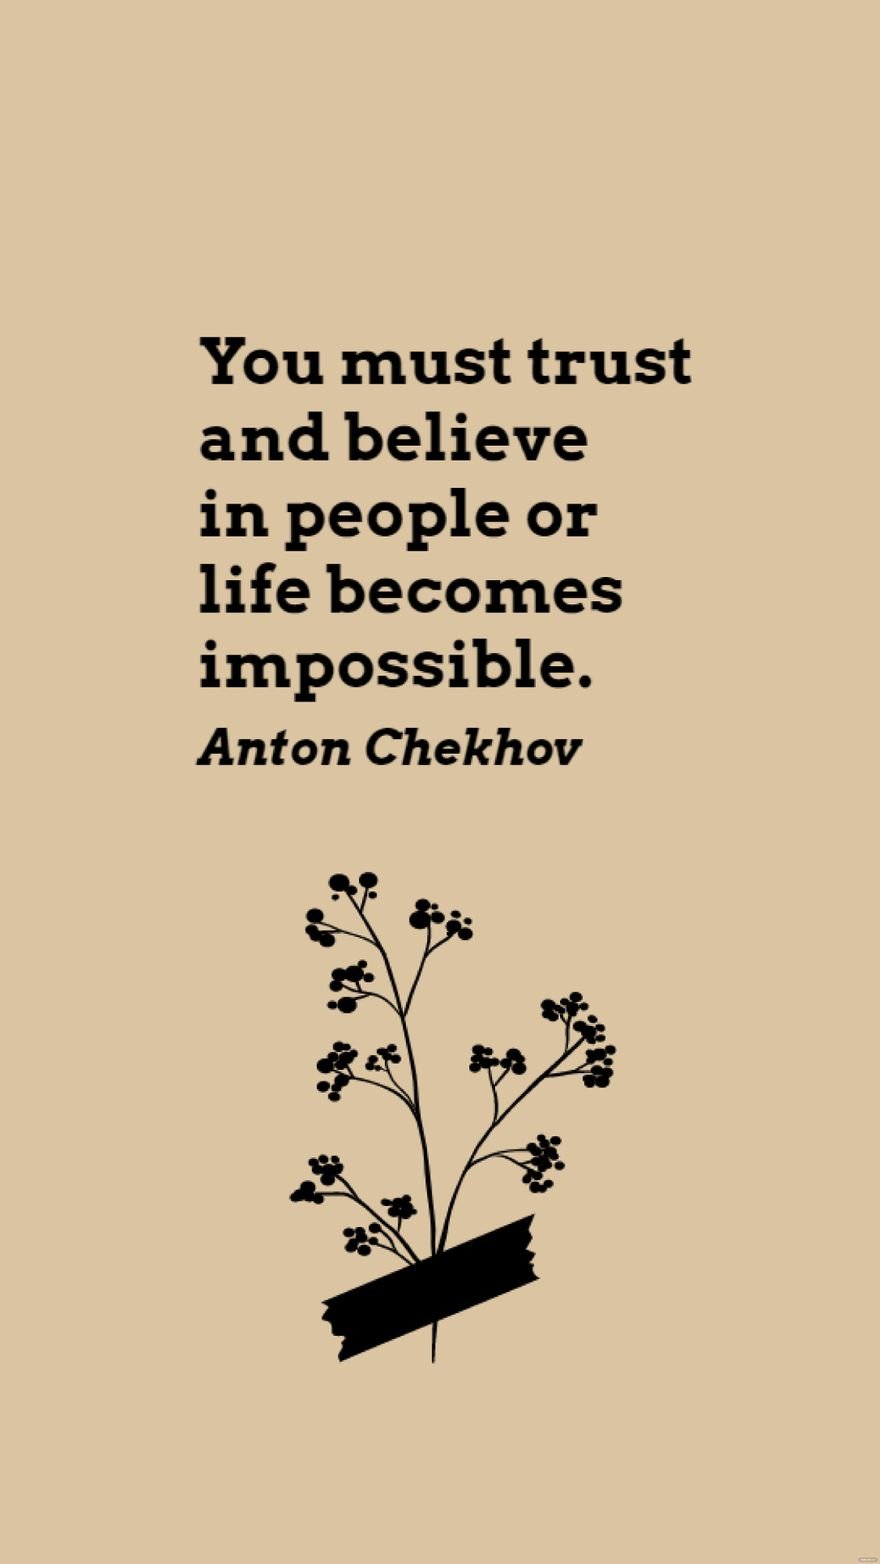 Anton Chekhov - You must trust and believe in people or life becomes impossible. in JPG